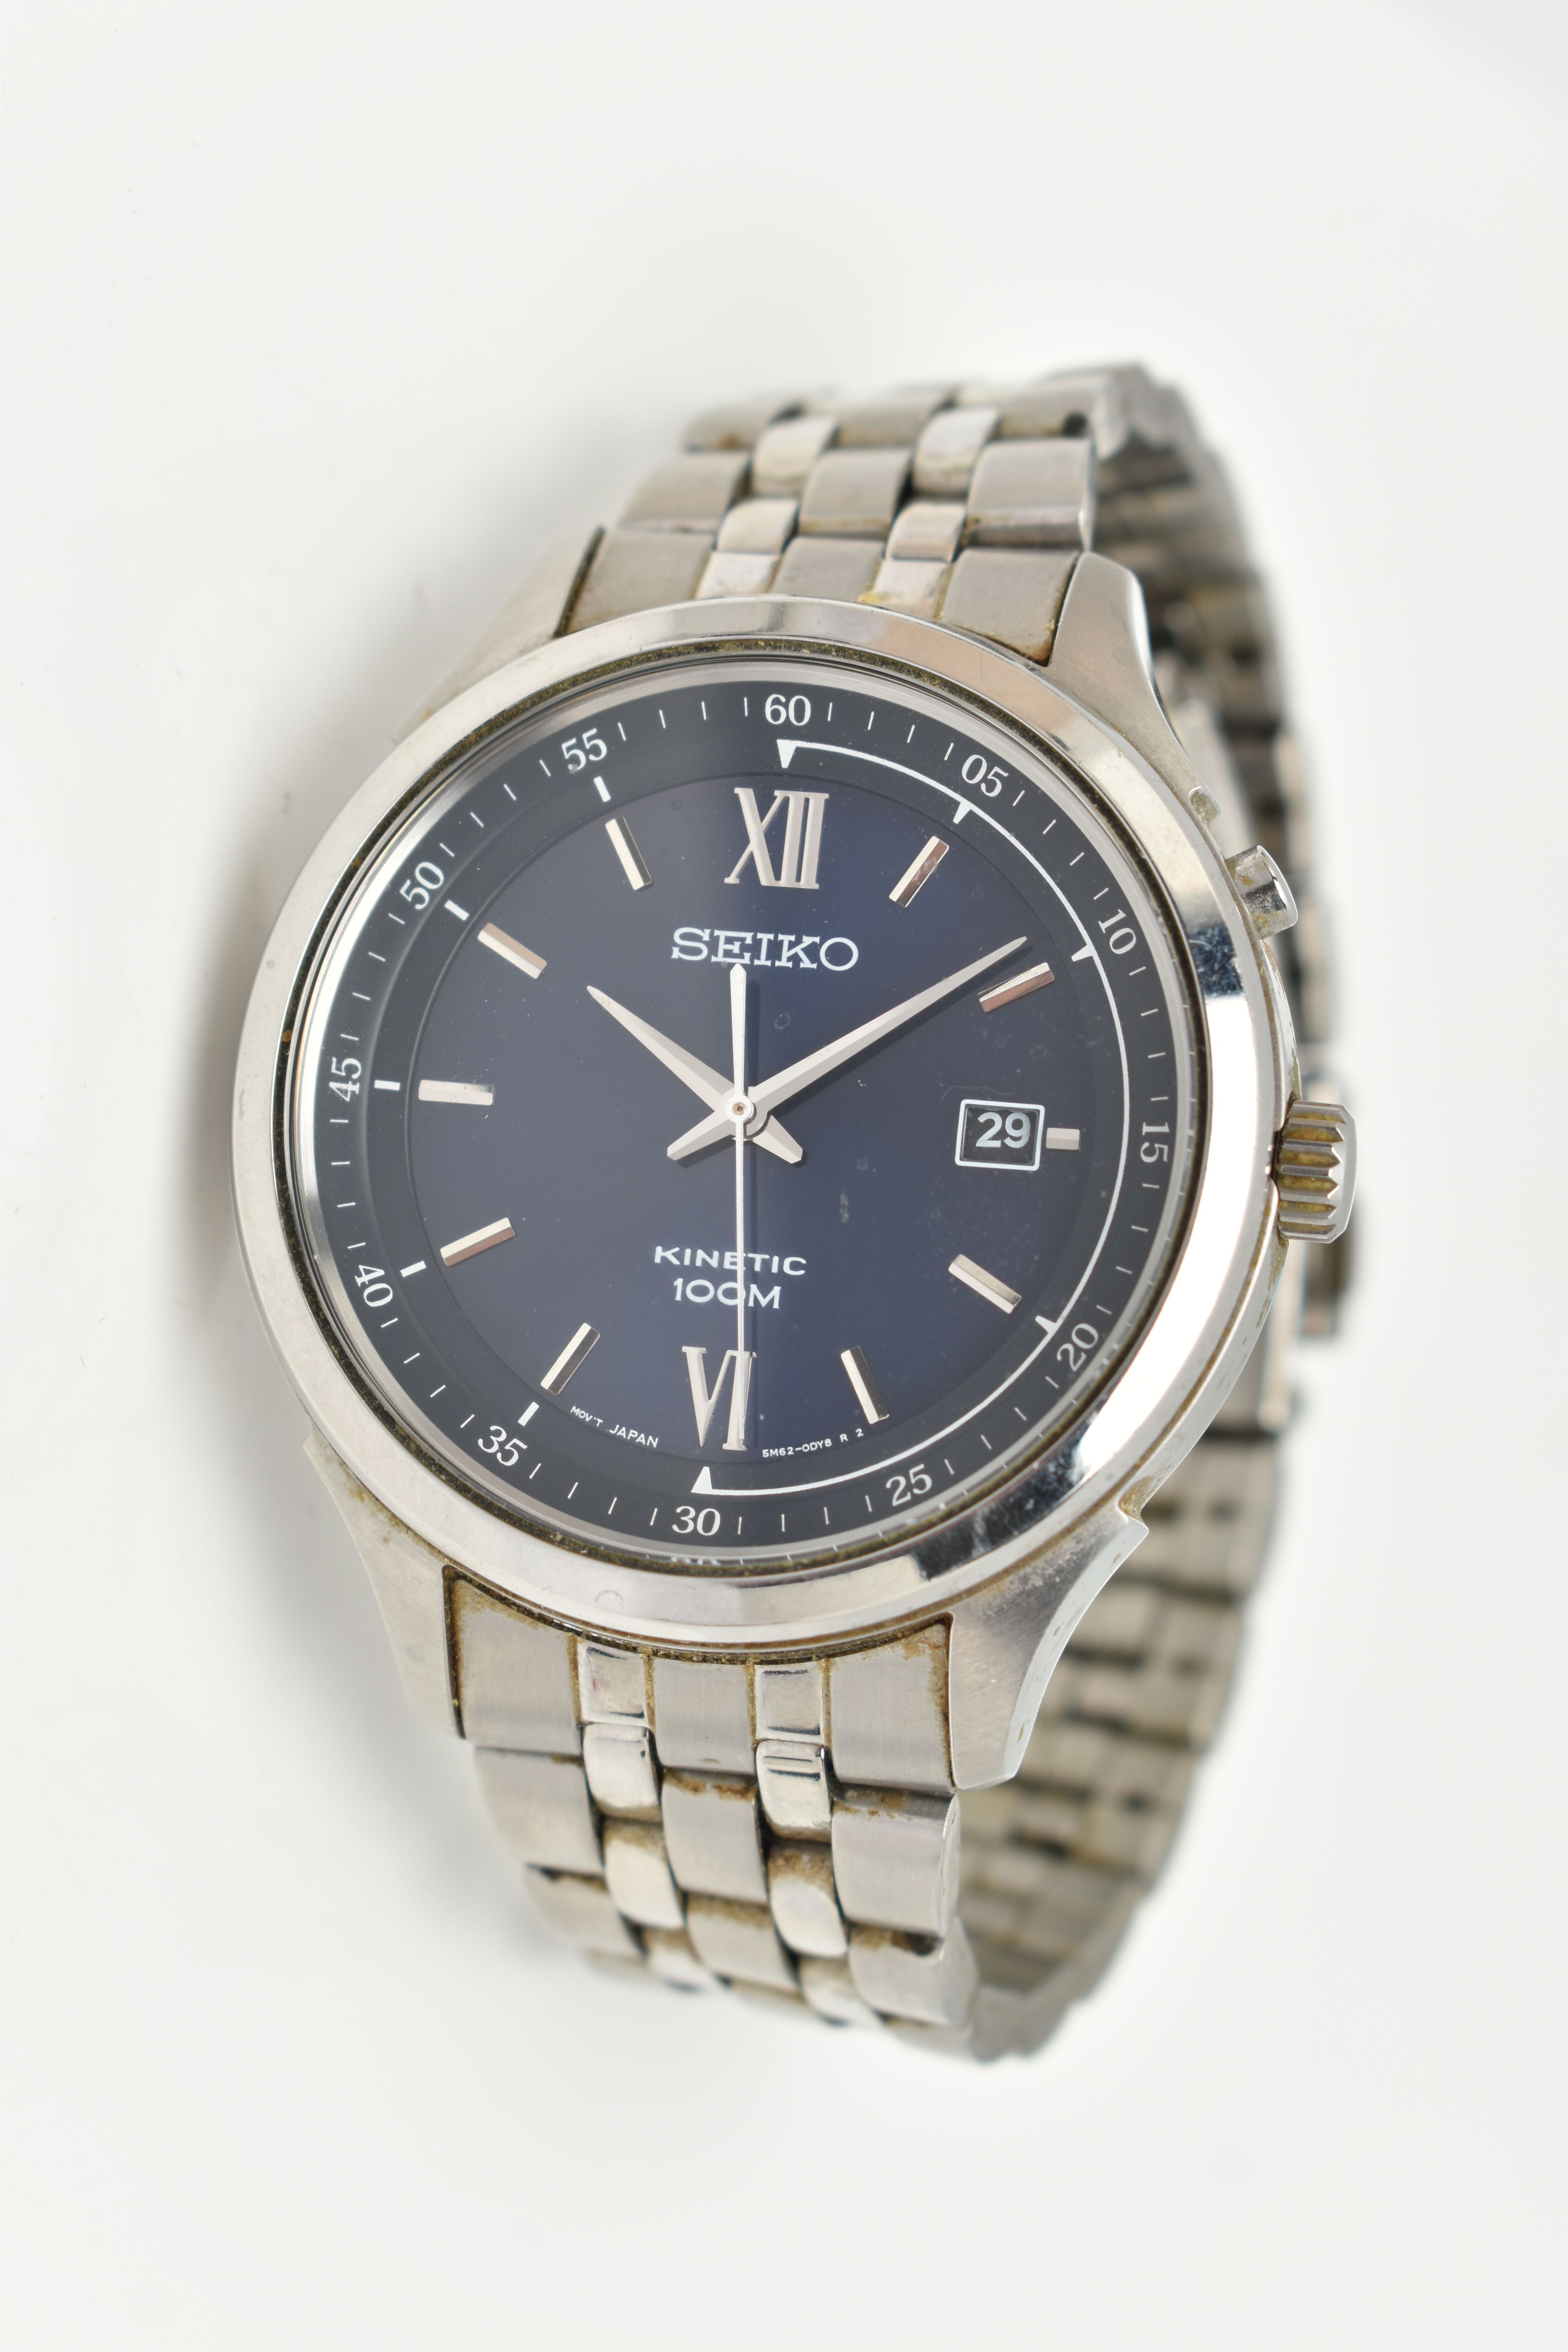 A GENTS 'SEIKO' WRISTWATCH, kinetic movement, round blue dial signed 'Seiko kinetic 100m', baton - Image 4 of 8